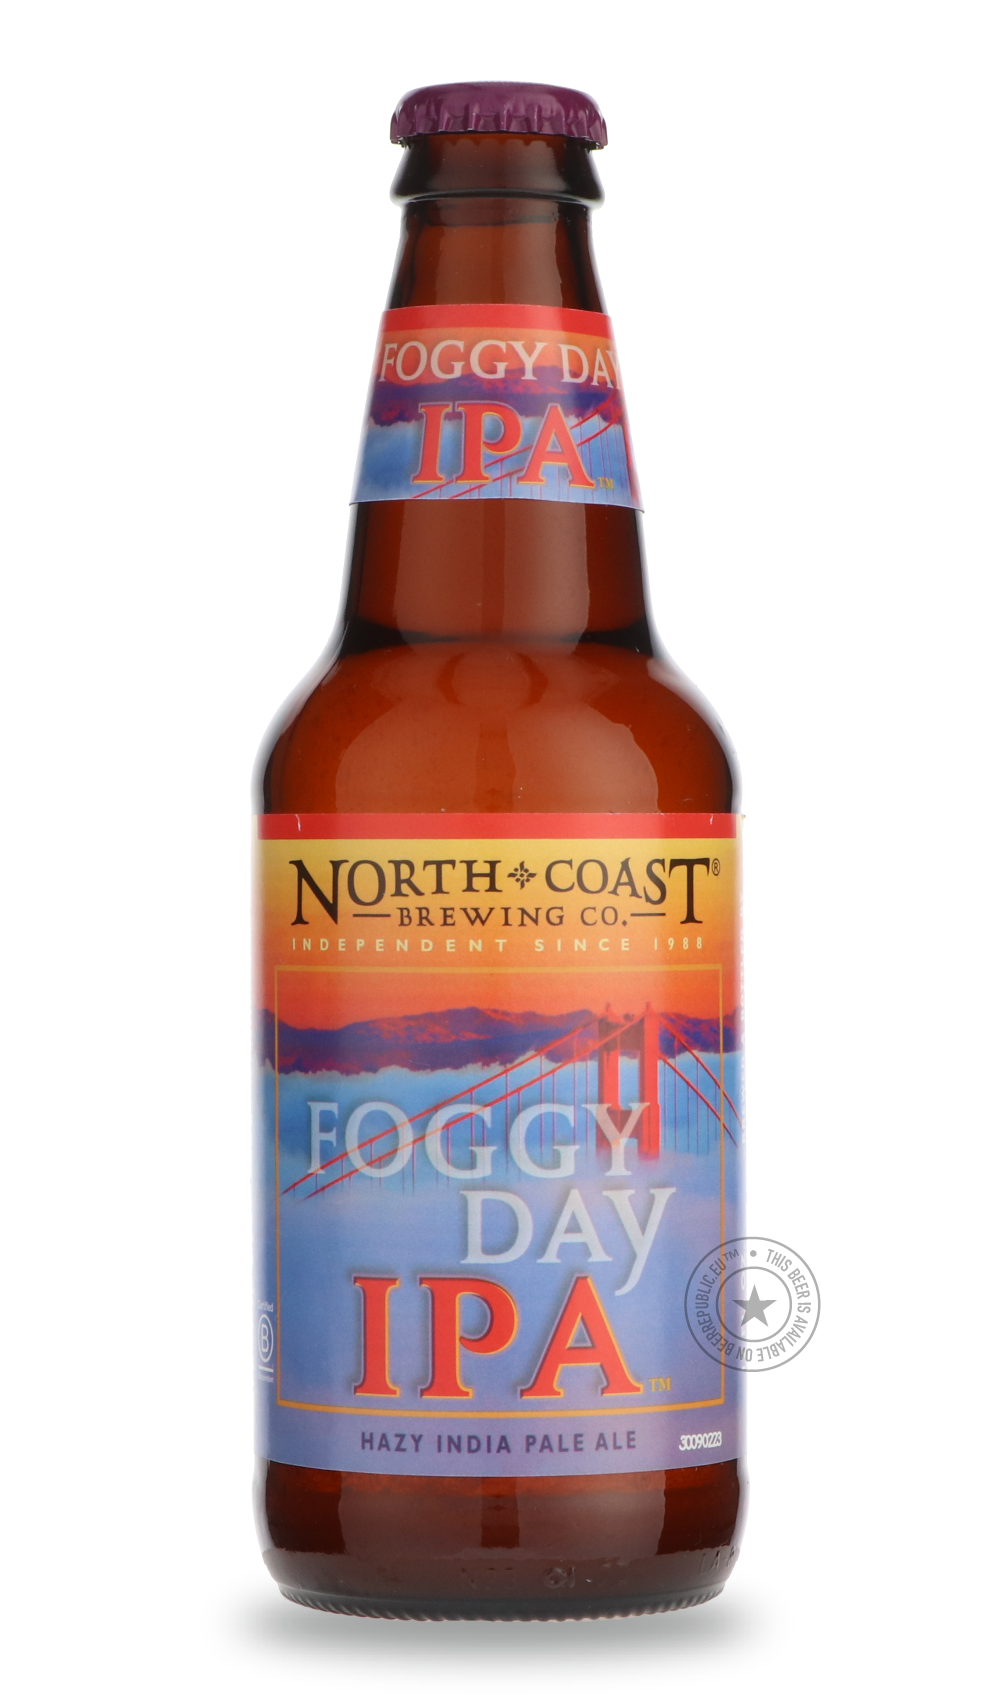 -North Coast- Foggy Day-IPA- Only @ Beer Republic - The best online beer store for American & Canadian craft beer - Buy beer online from the USA and Canada - Bier online kopen - Amerikaans bier kopen - Craft beer store - Craft beer kopen - Amerikanisch bier kaufen - Bier online kaufen - Acheter biere online - IPA - Stout - Porter - New England IPA - Hazy IPA - Imperial Stout - Barrel Aged - Barrel Aged Imperial Stout - Brown - Dark beer - Blond - Blonde - Pilsner - Lager - Wheat - Weizen - Amber - Barley Wi